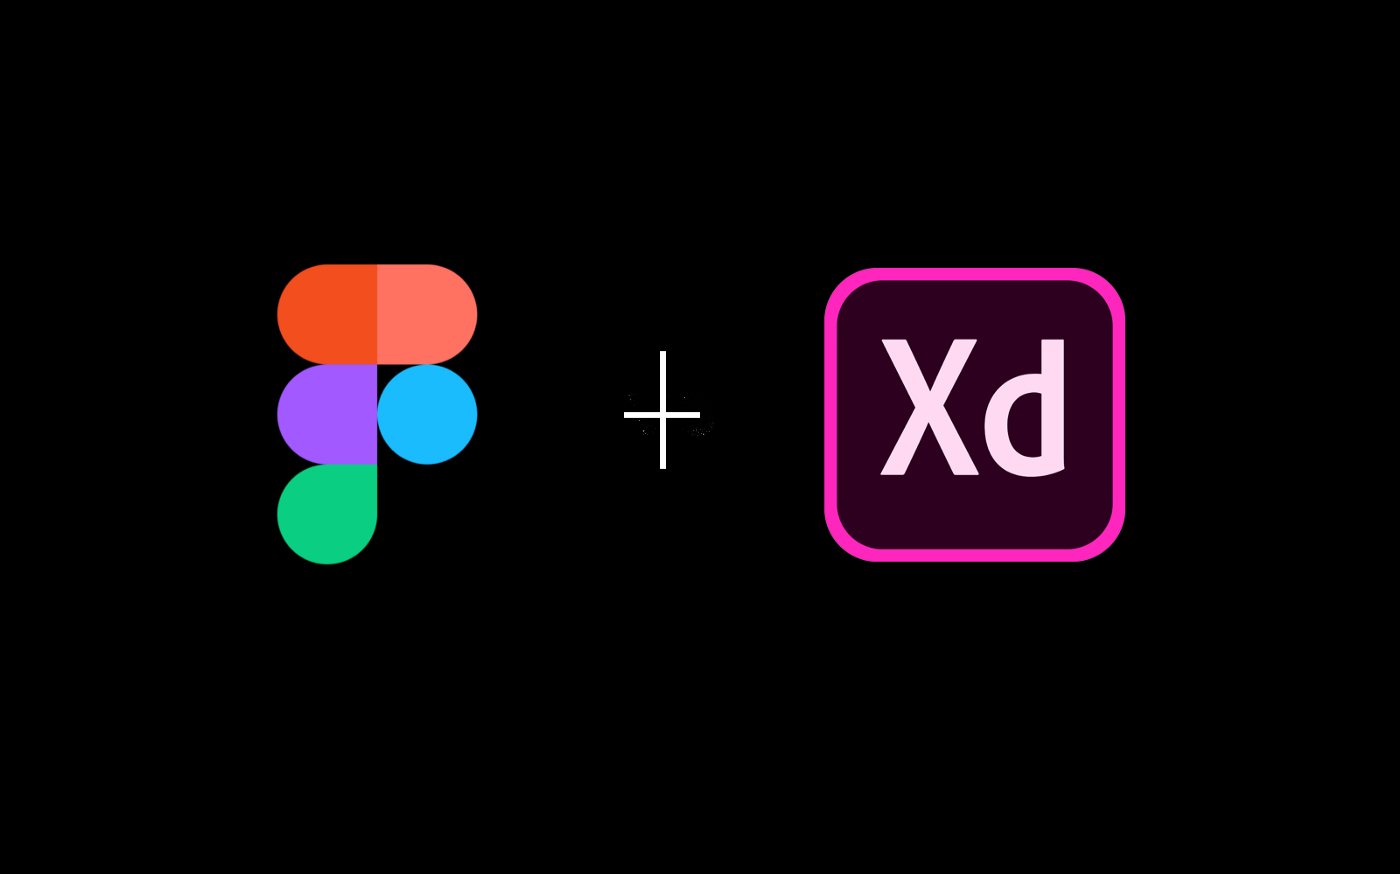 Adobe-buys-Figma-for-20-billion-largest-deal-of-its